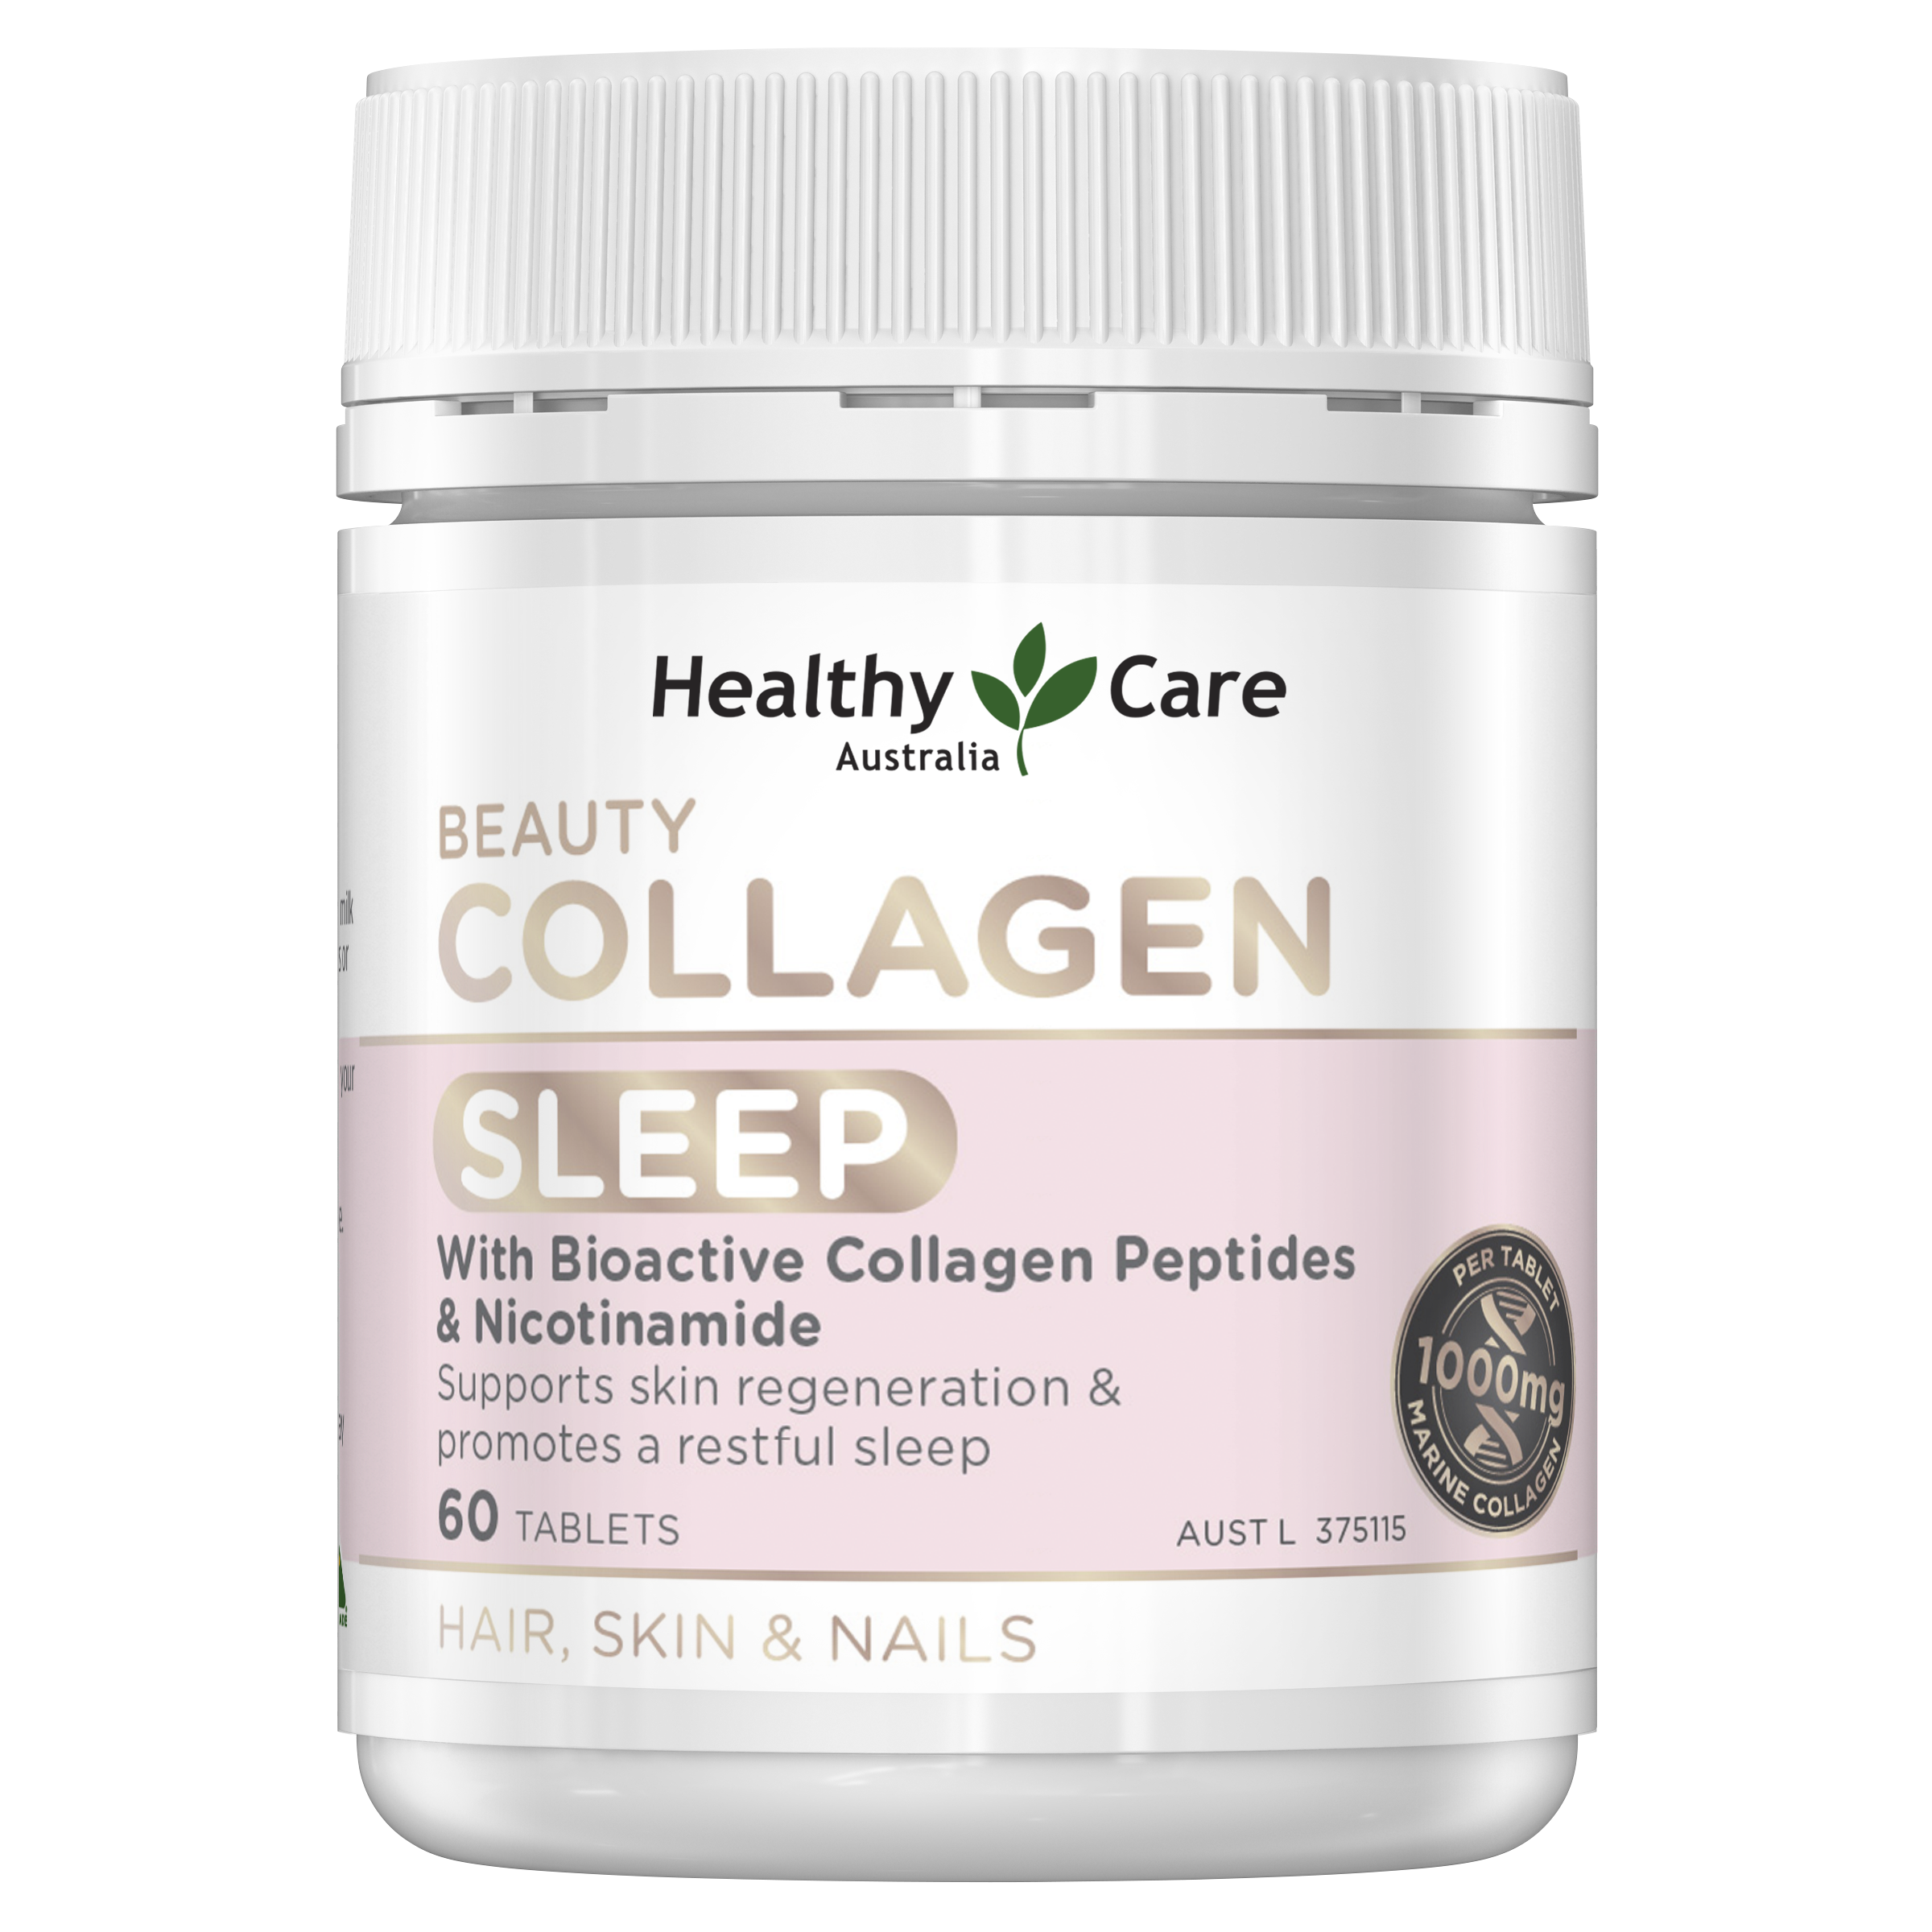 Healthy Care Beauty Collagen Sleep 60 Tablets